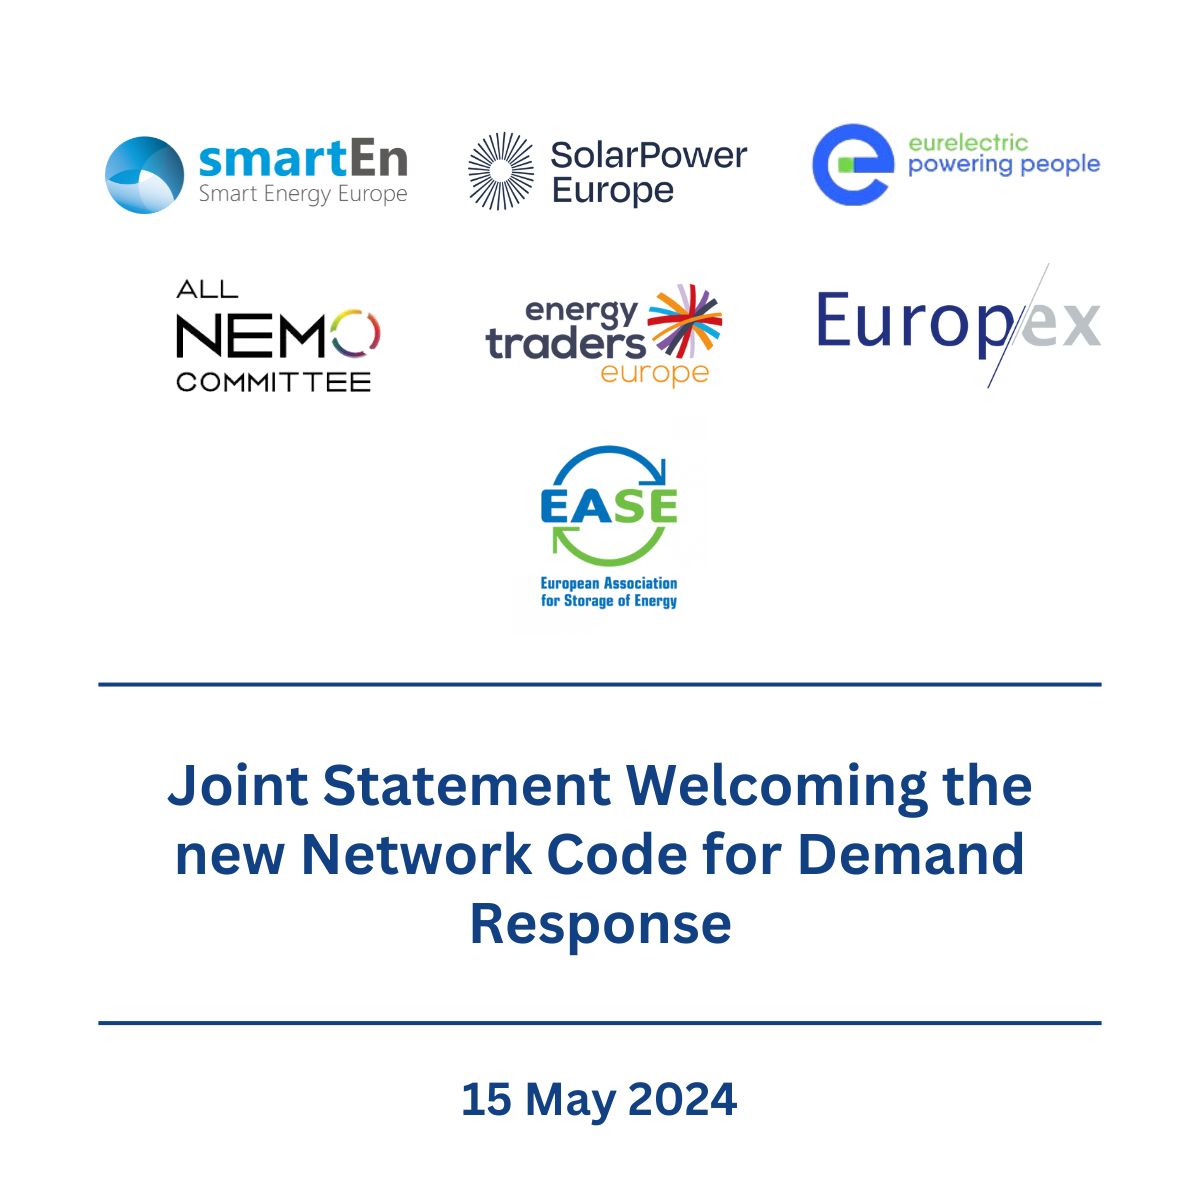 Together with @smartEnEU, @SolarPowerEU, @Eurelectric, #AllNEMOCommittee, @energytraderseu and @EASE_ES , Europex welcomes the new #DemandResponse #NetworkCode drafted by @ENTSO_E  & @DSOEntity_eu!

🔗europex.org/wp-content/upl…